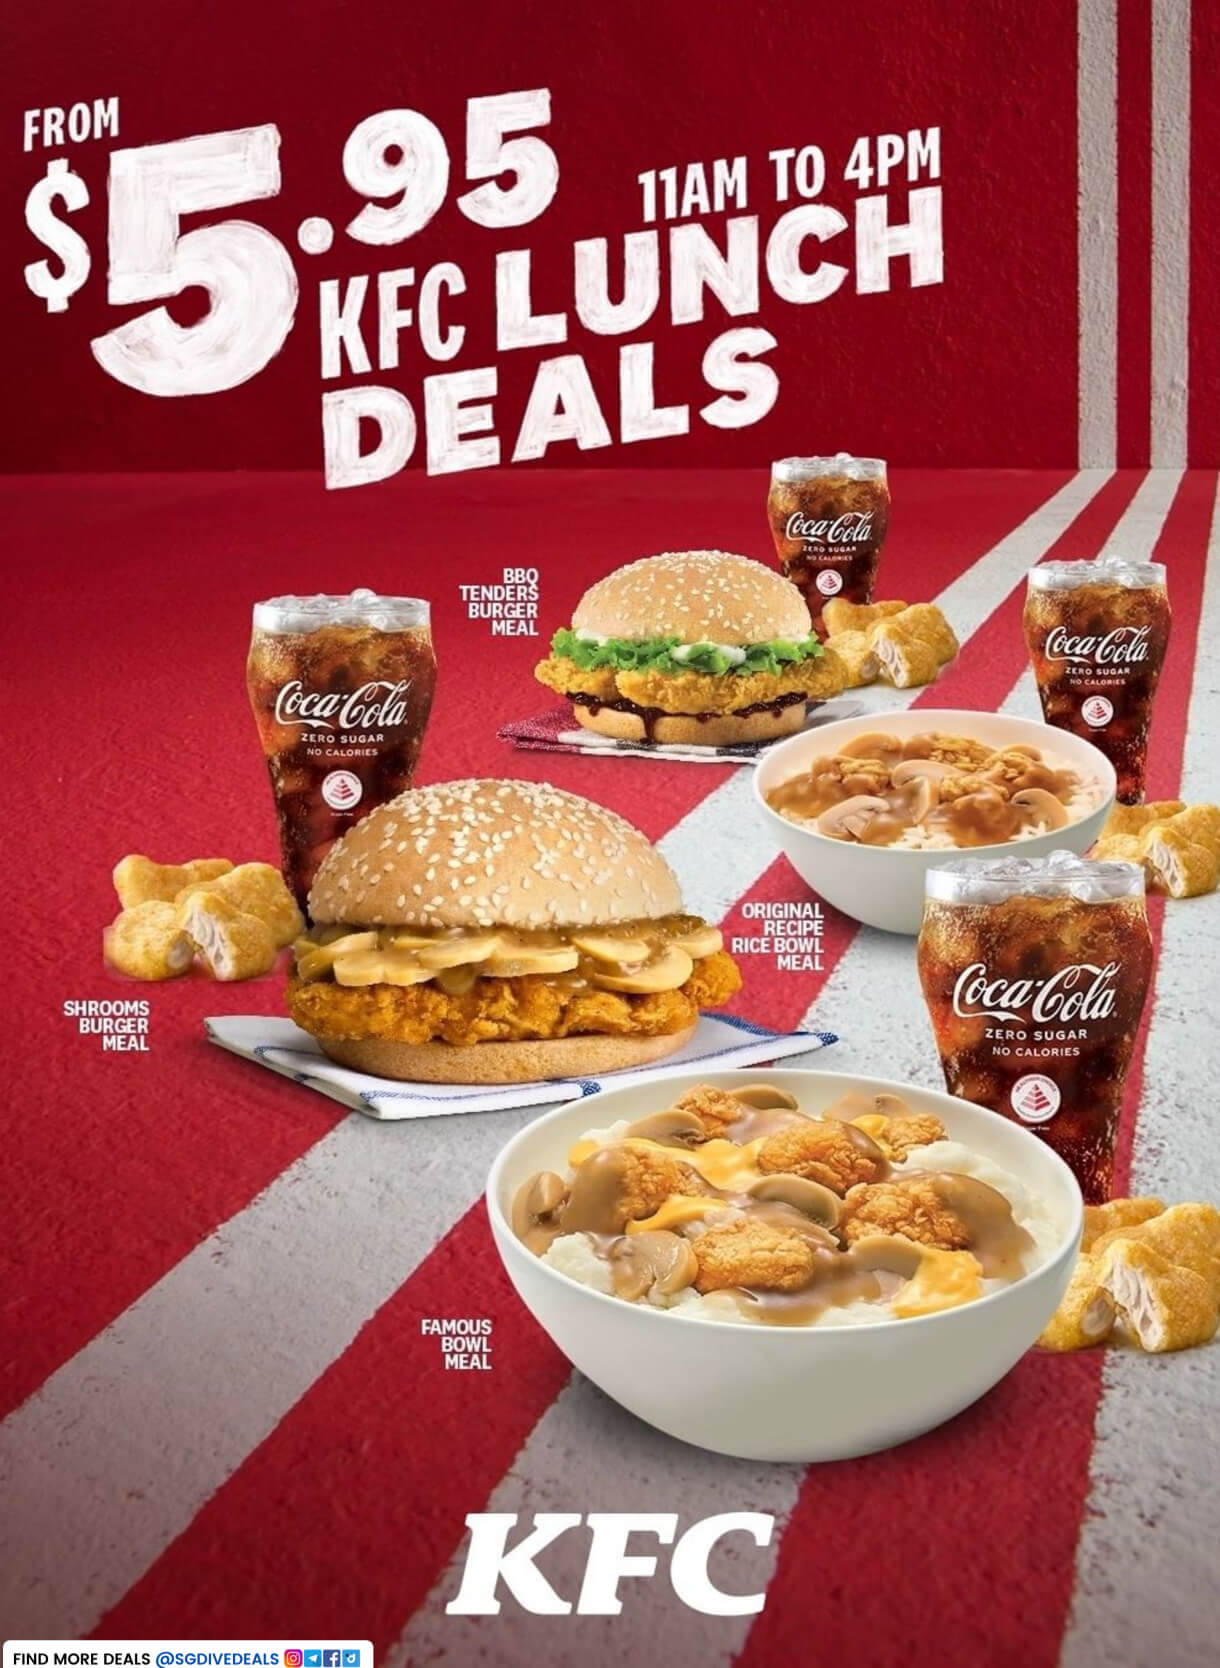 KFC,Enjoy lunch meal for just $5.95